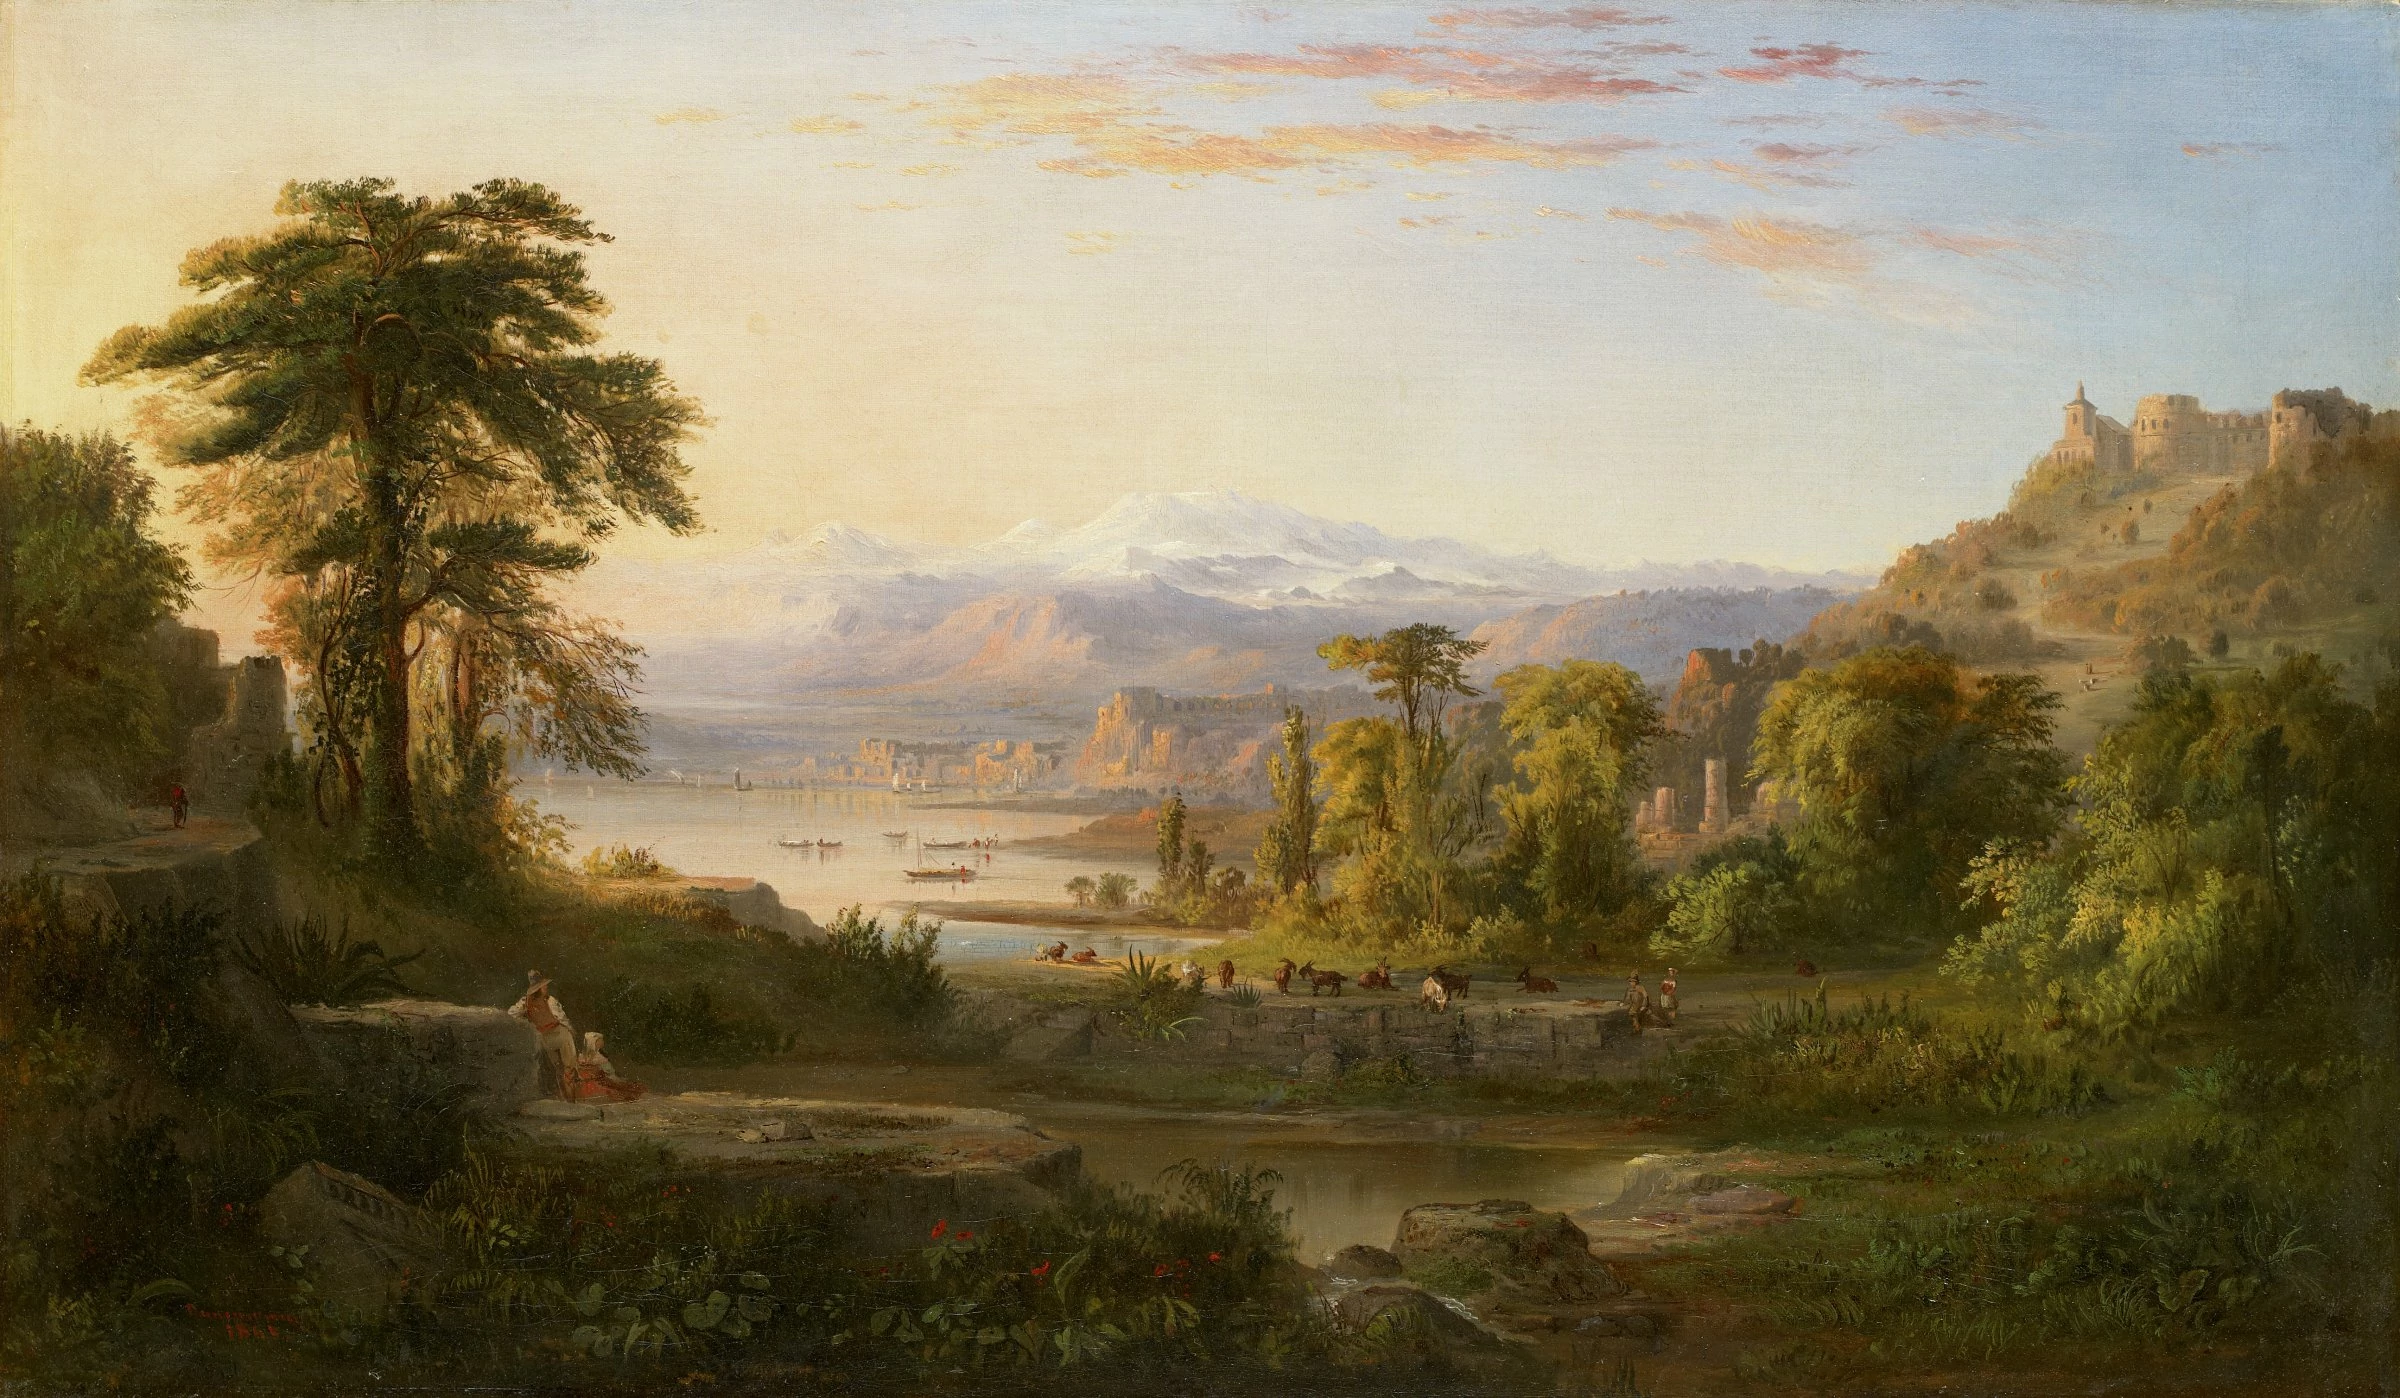 A Dream of Italy, Robert S. Duncanson